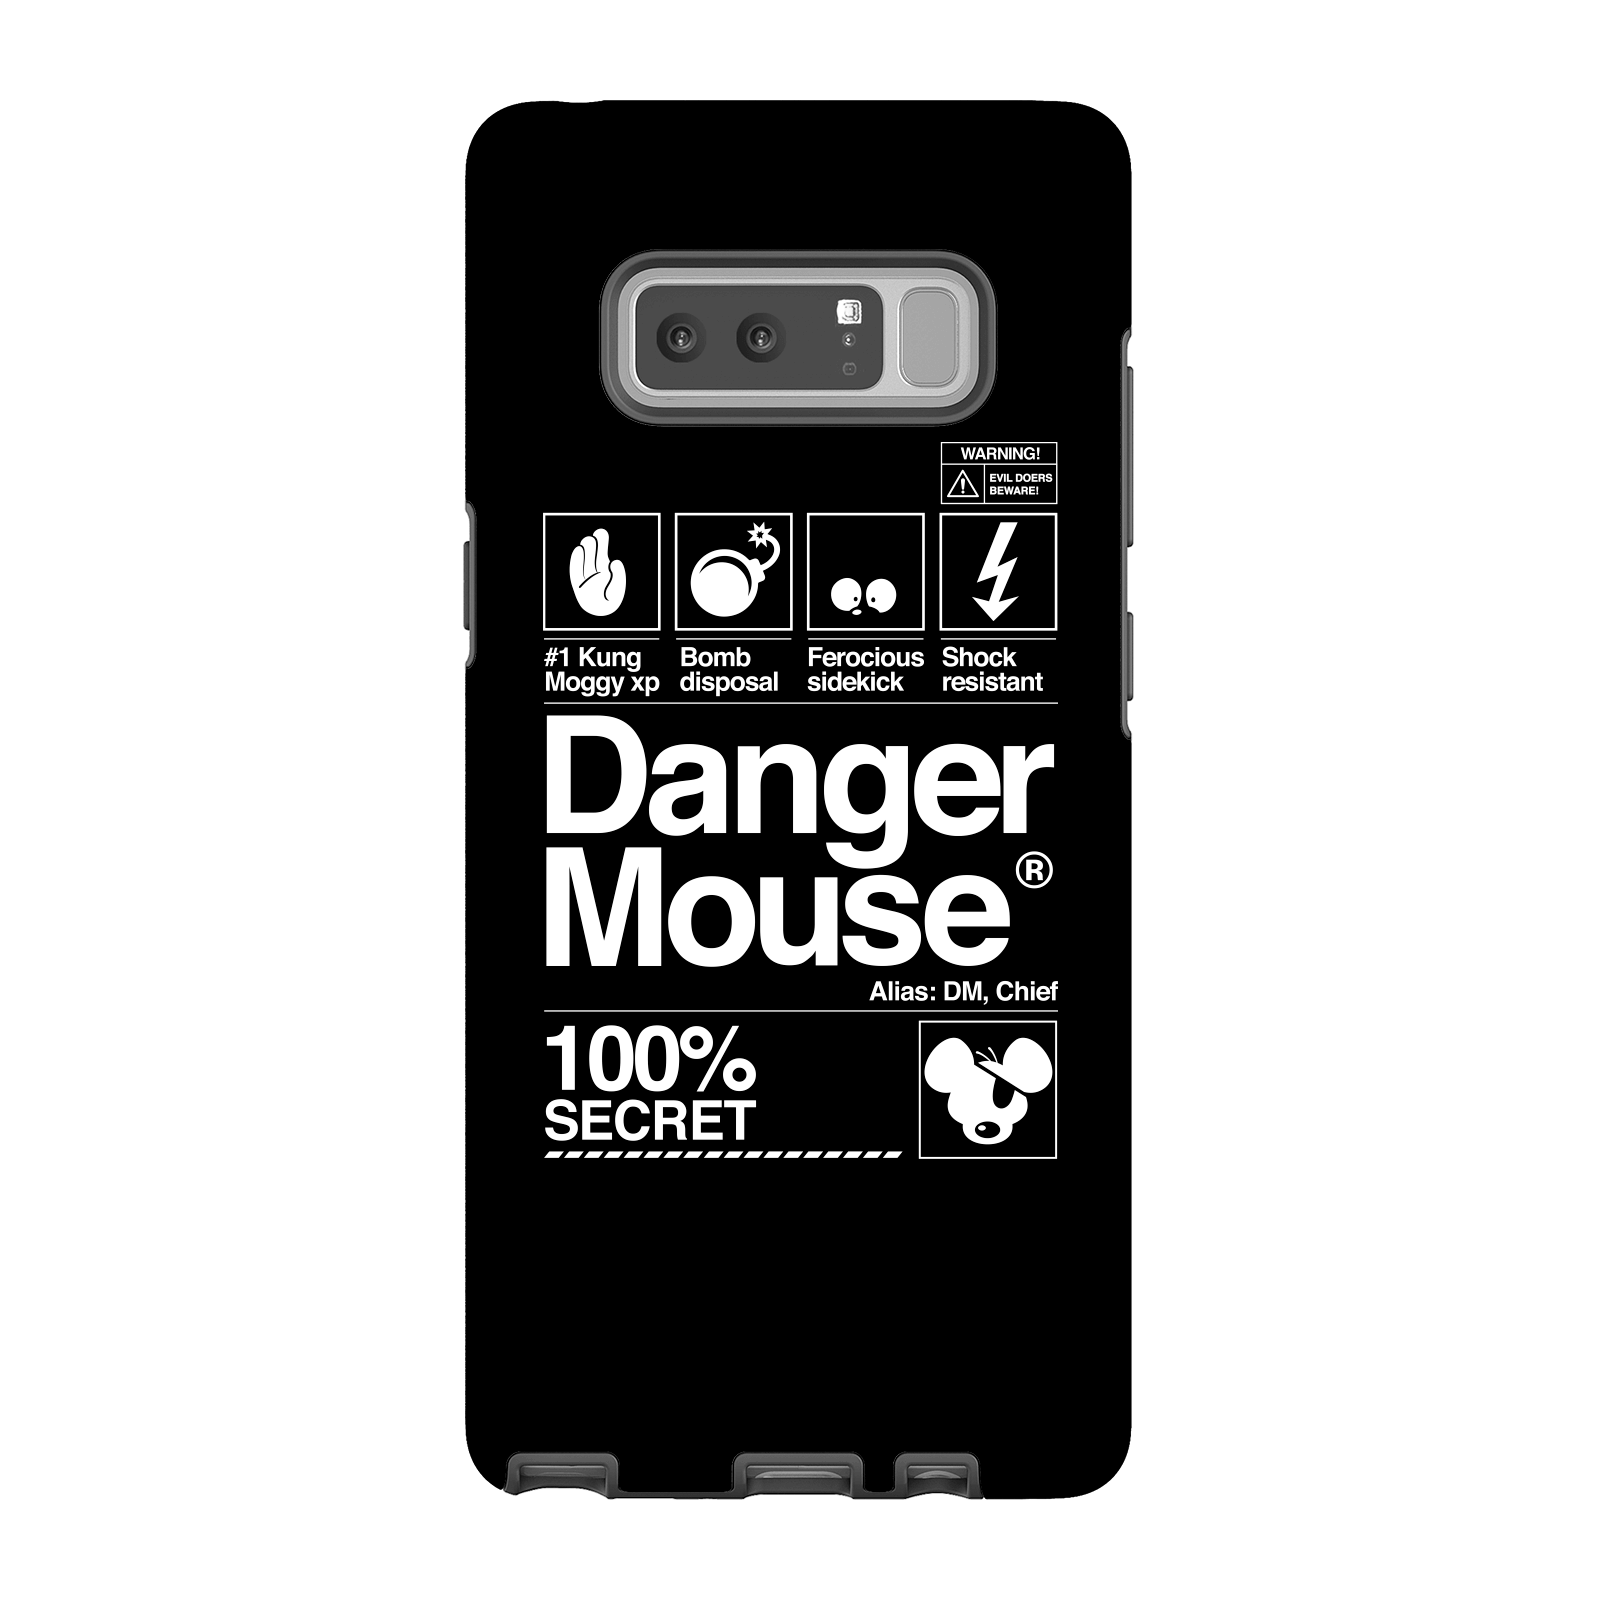 Danger Mouse 100% Secret Phone Case for iPhone and Android - Samsung Note 8 - Tough Case - Matte